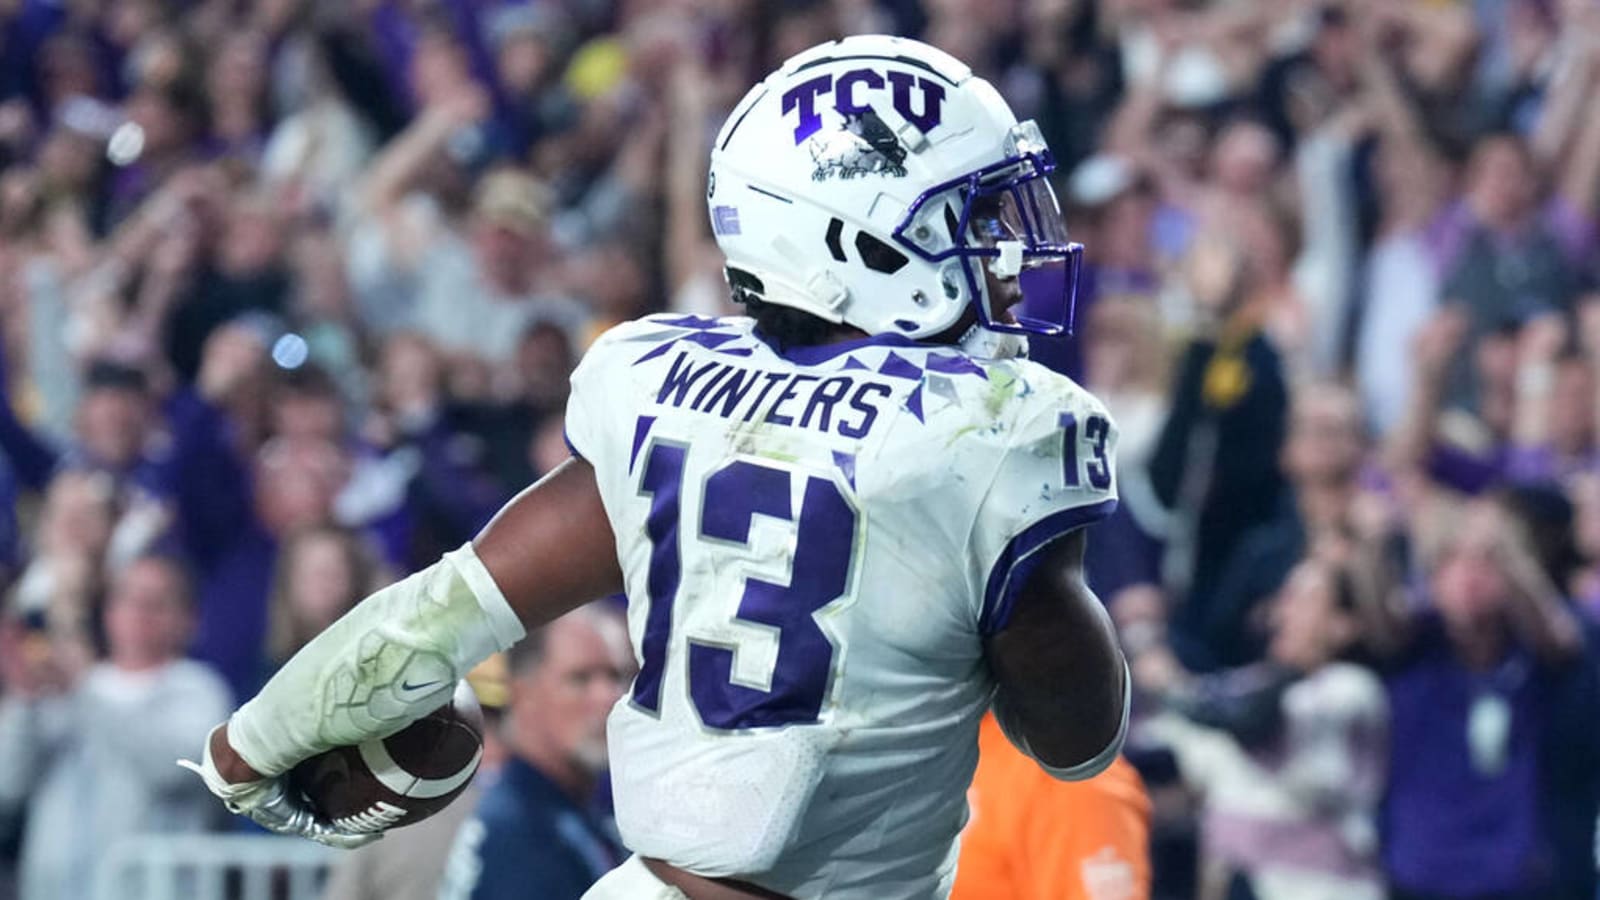 ESPN cameras completely fooled on Dee Winters pick-six for TCU